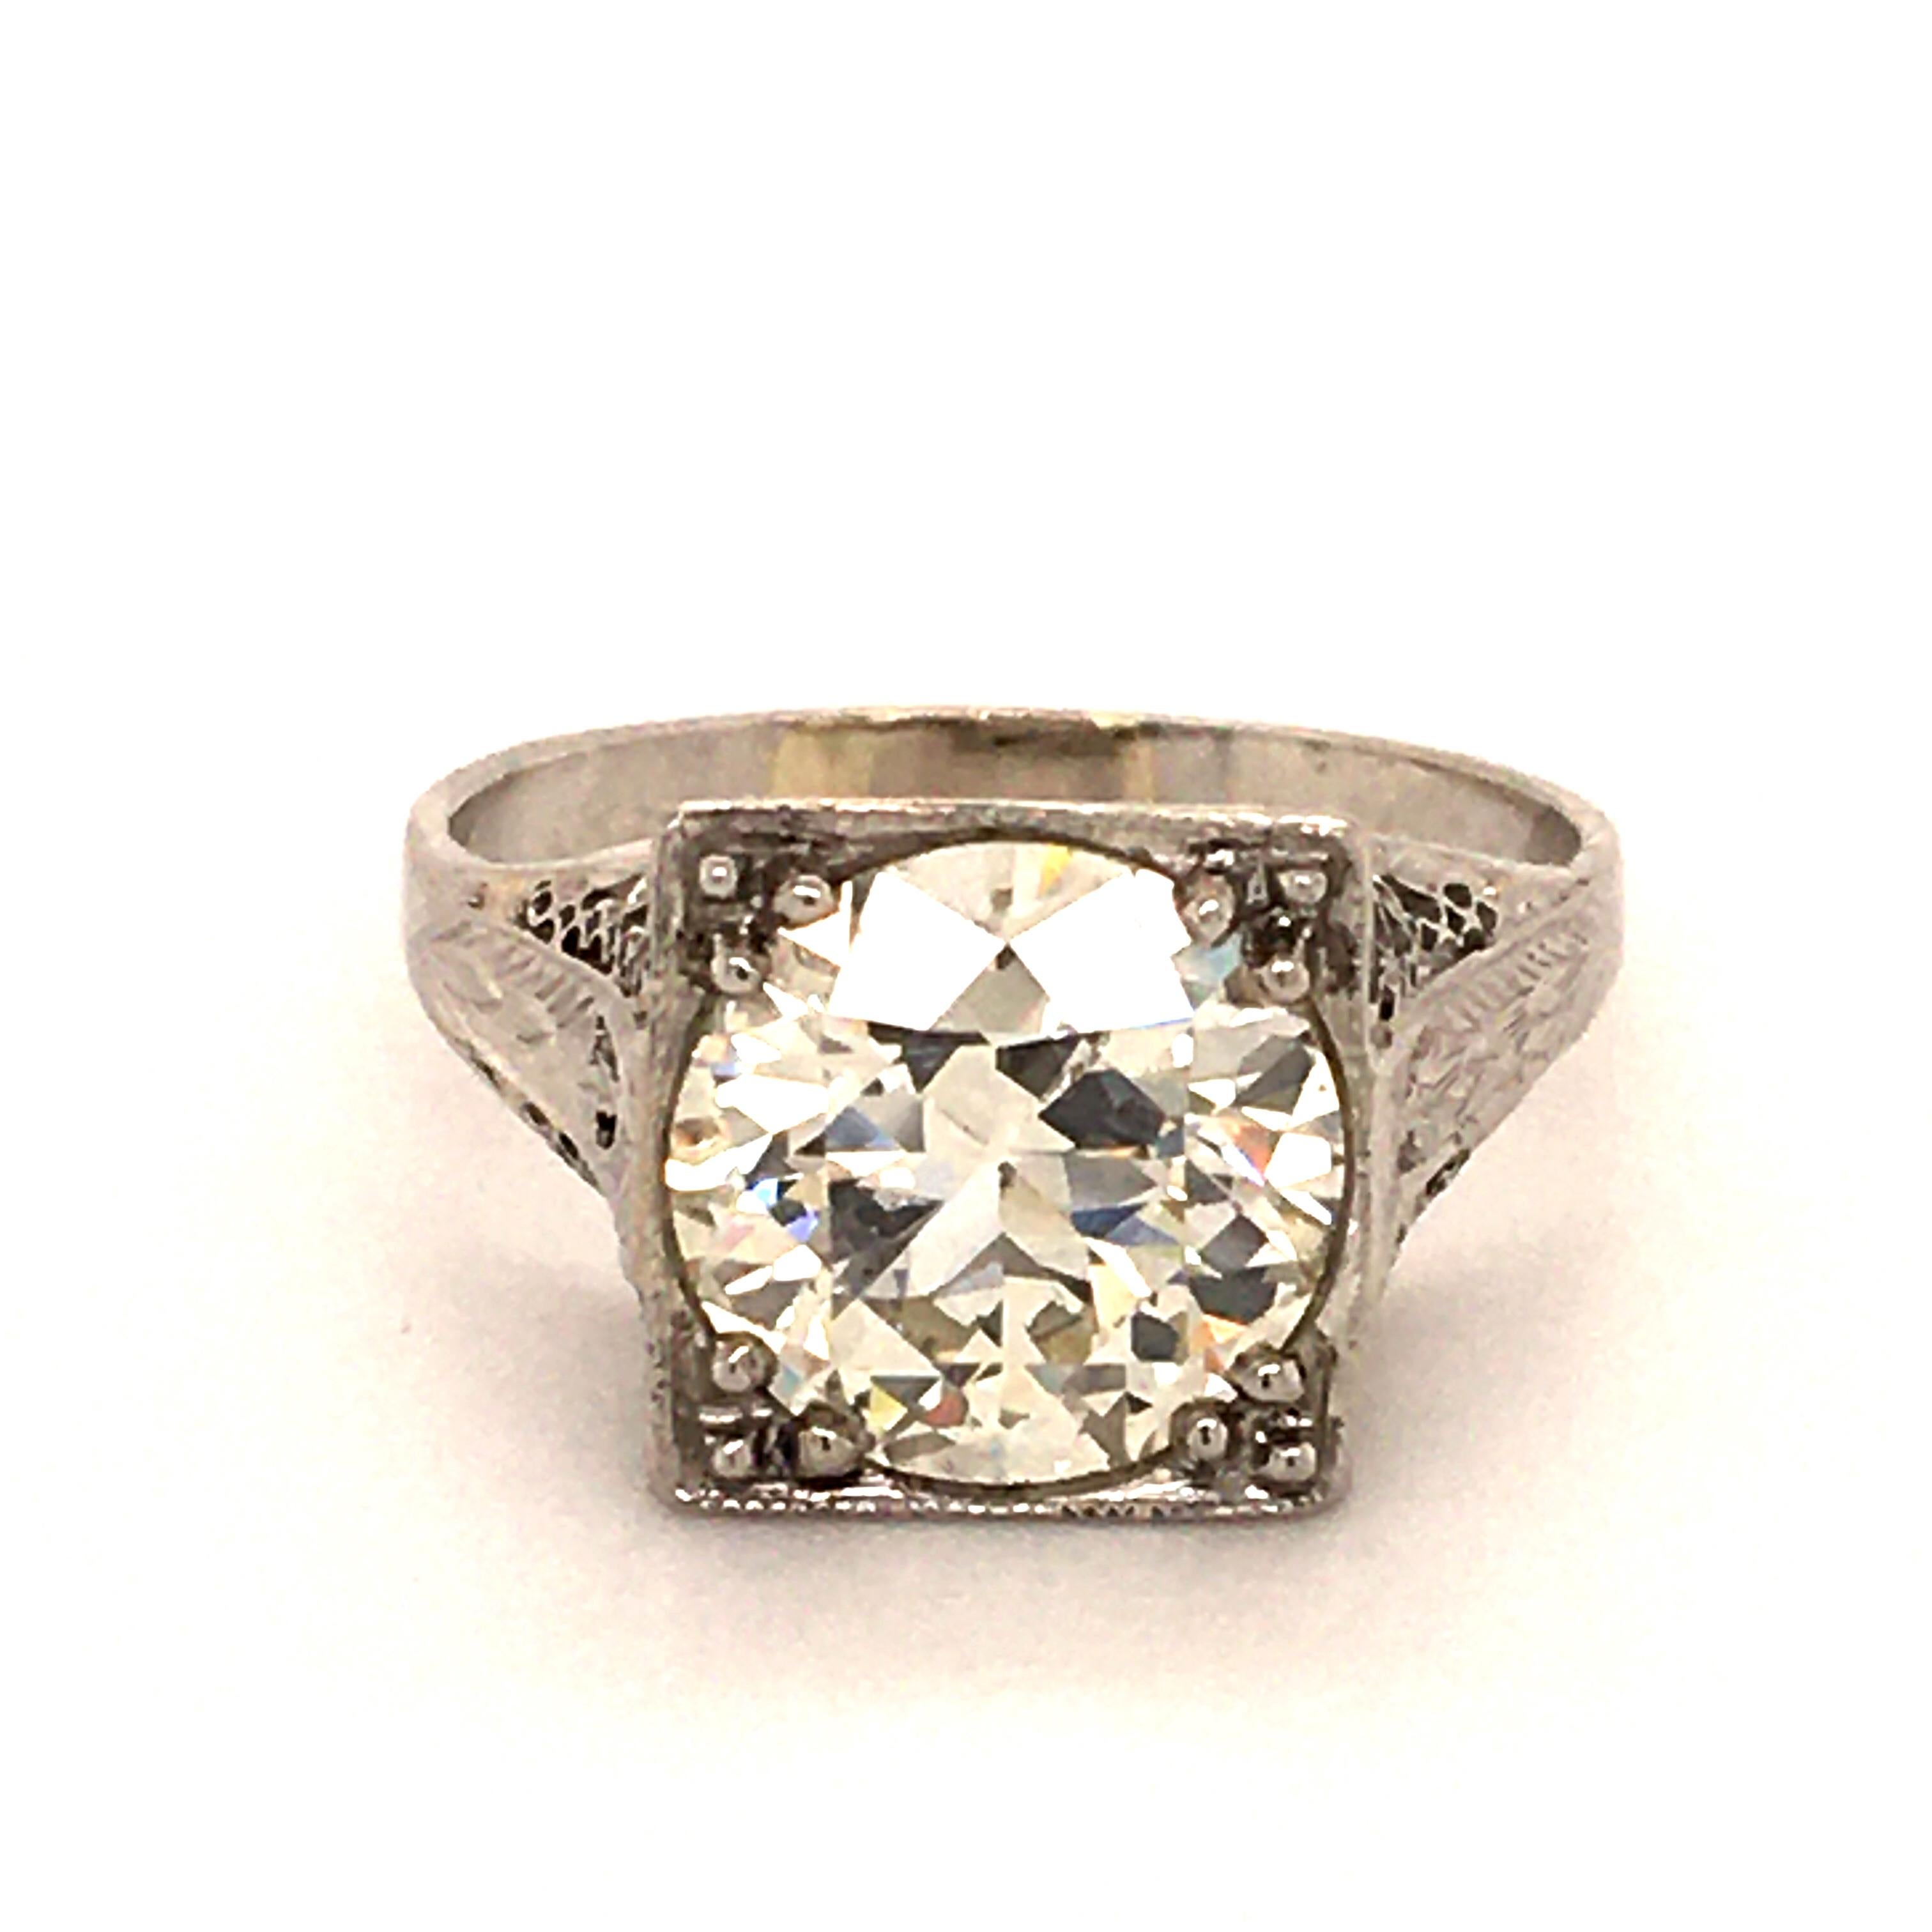 Early Art Deco filigree setting in Platinum 950. Set with a wonderful old cut Diamond of 3.08 ct. The charming gemstone is accompanied by GIA report stating that the Diamond is of M Color and vs1 clarity. A true pearl of an antique piece of jewelry.